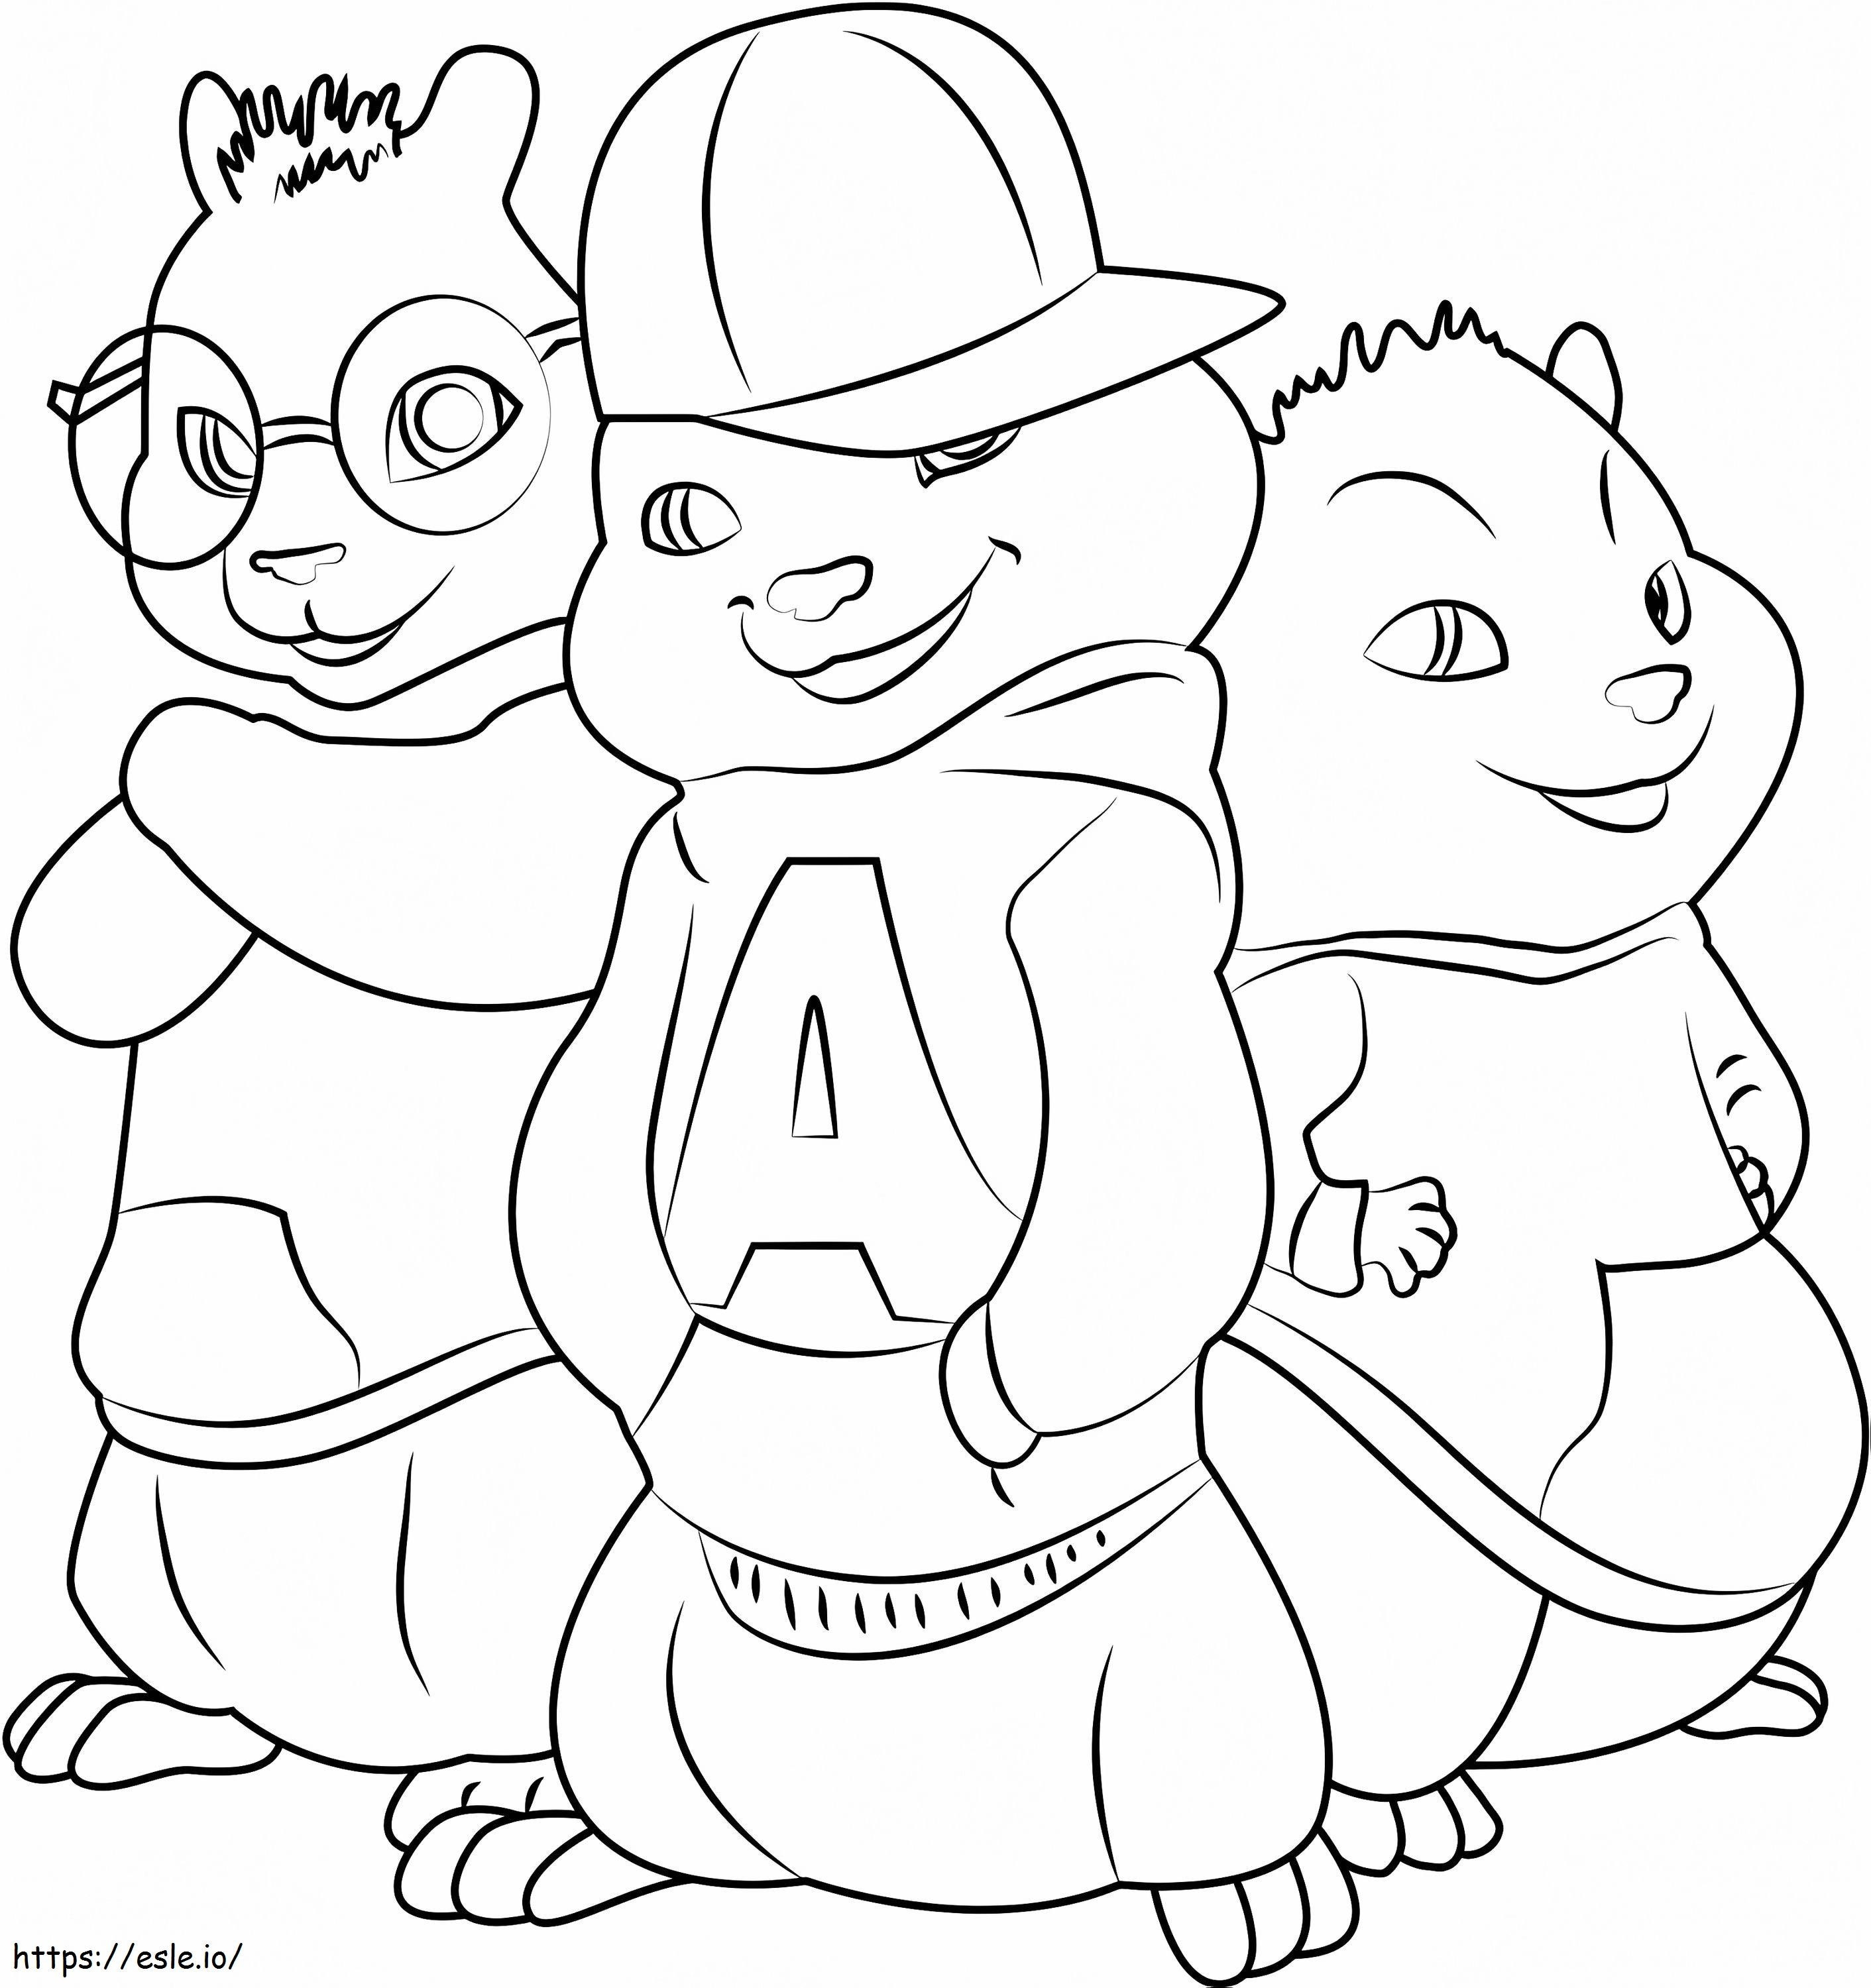 1532489055 Cool The Chipmunks A4 coloring page